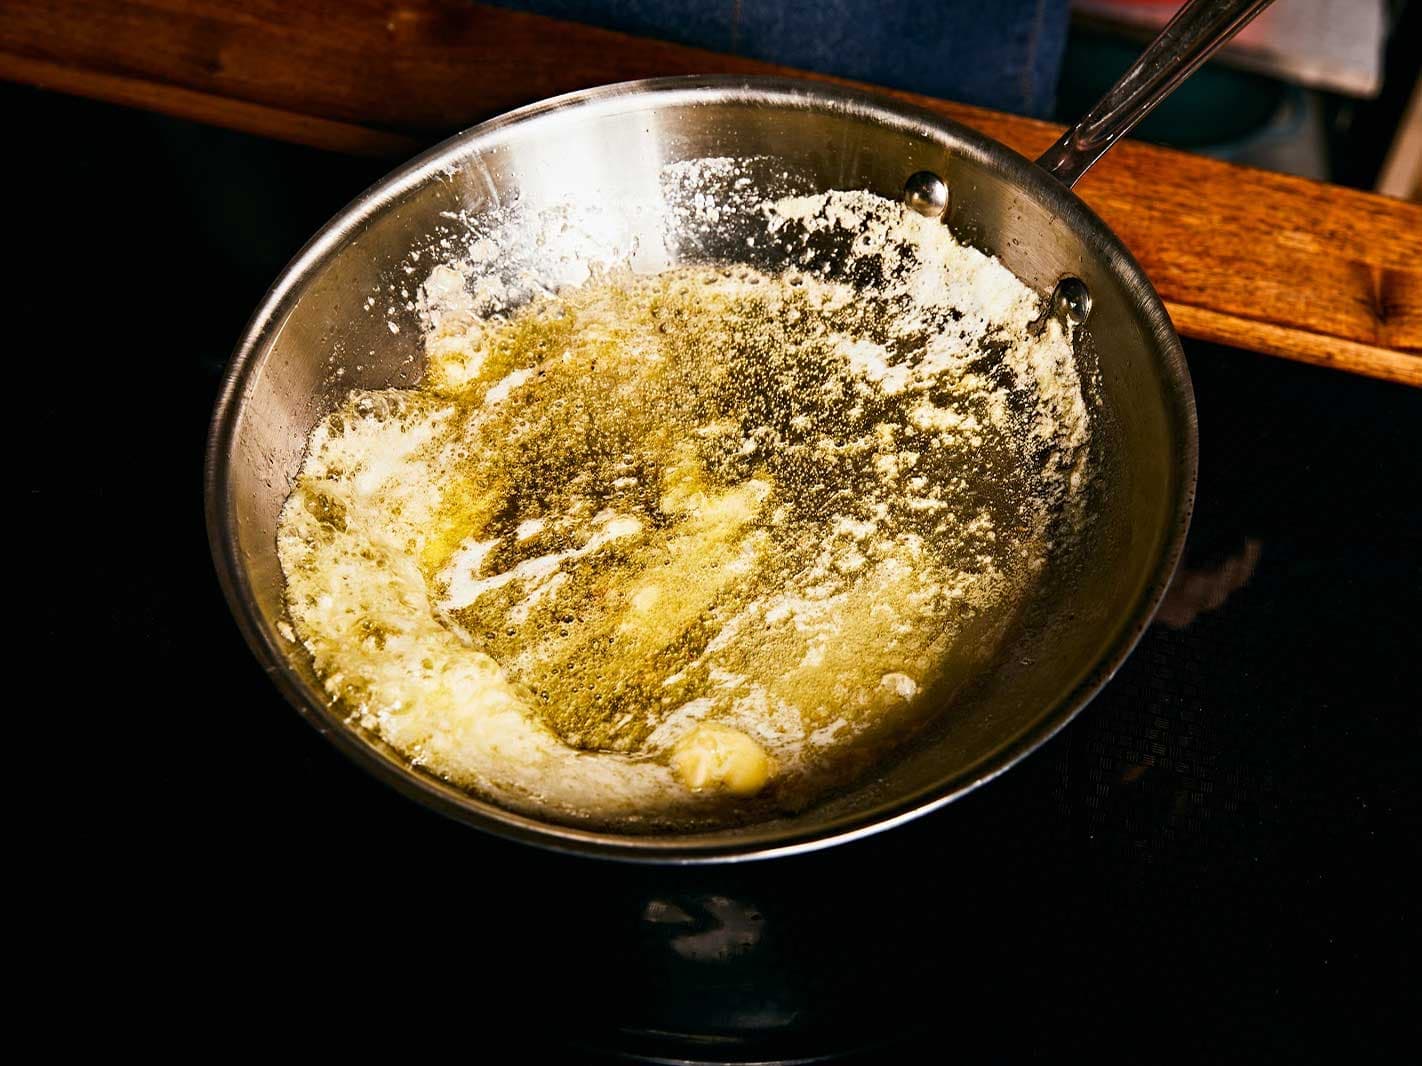 A pale-colored pan is best for browning butter. Be sure to swirl and stir frequently to avoid scorching.